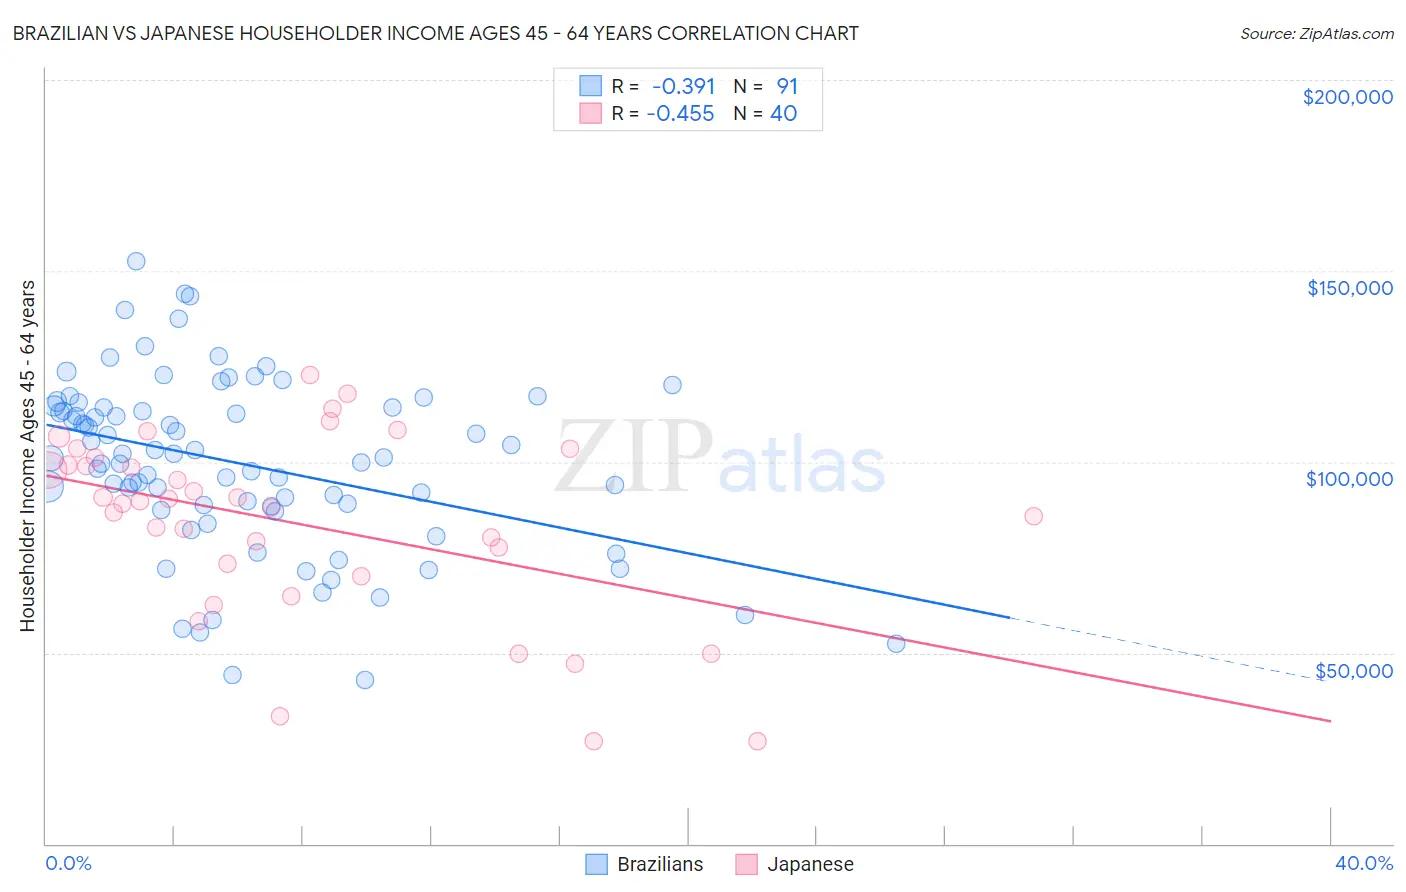 Brazilian vs Japanese Householder Income Ages 45 - 64 years